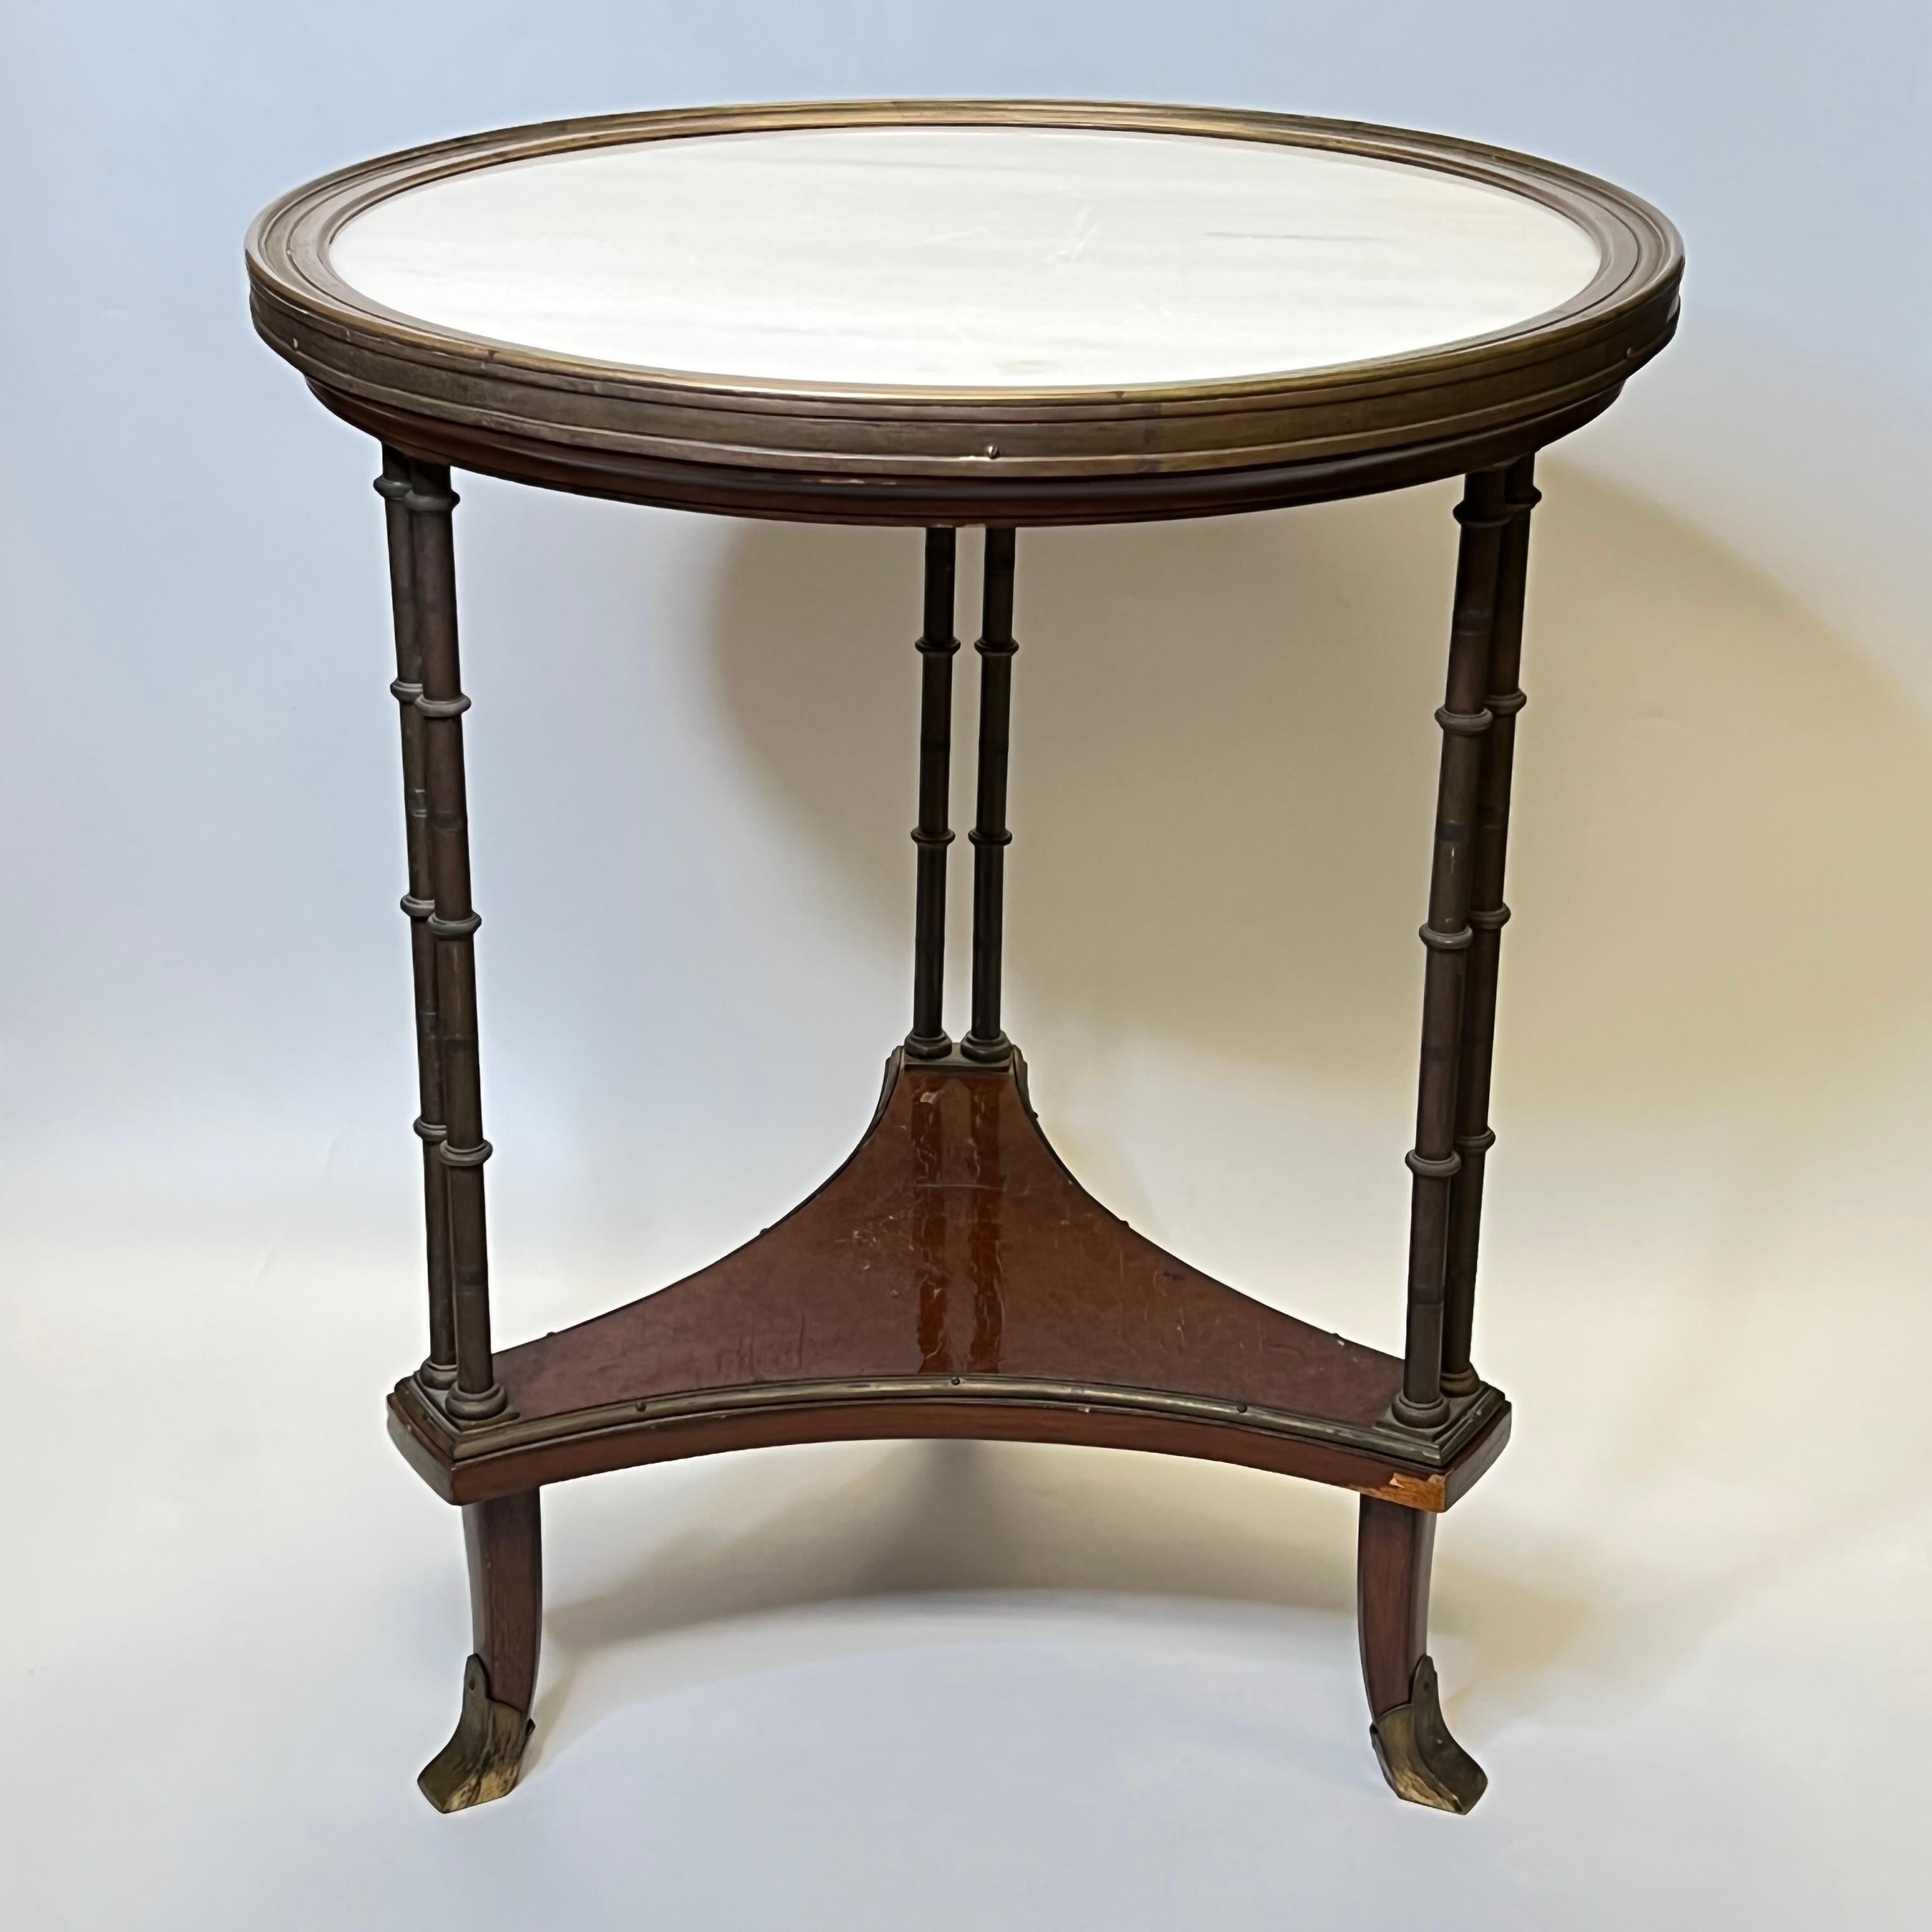 Louis XVI Style bronze and white marble Gueridon table with Bamboo form bronze legs.